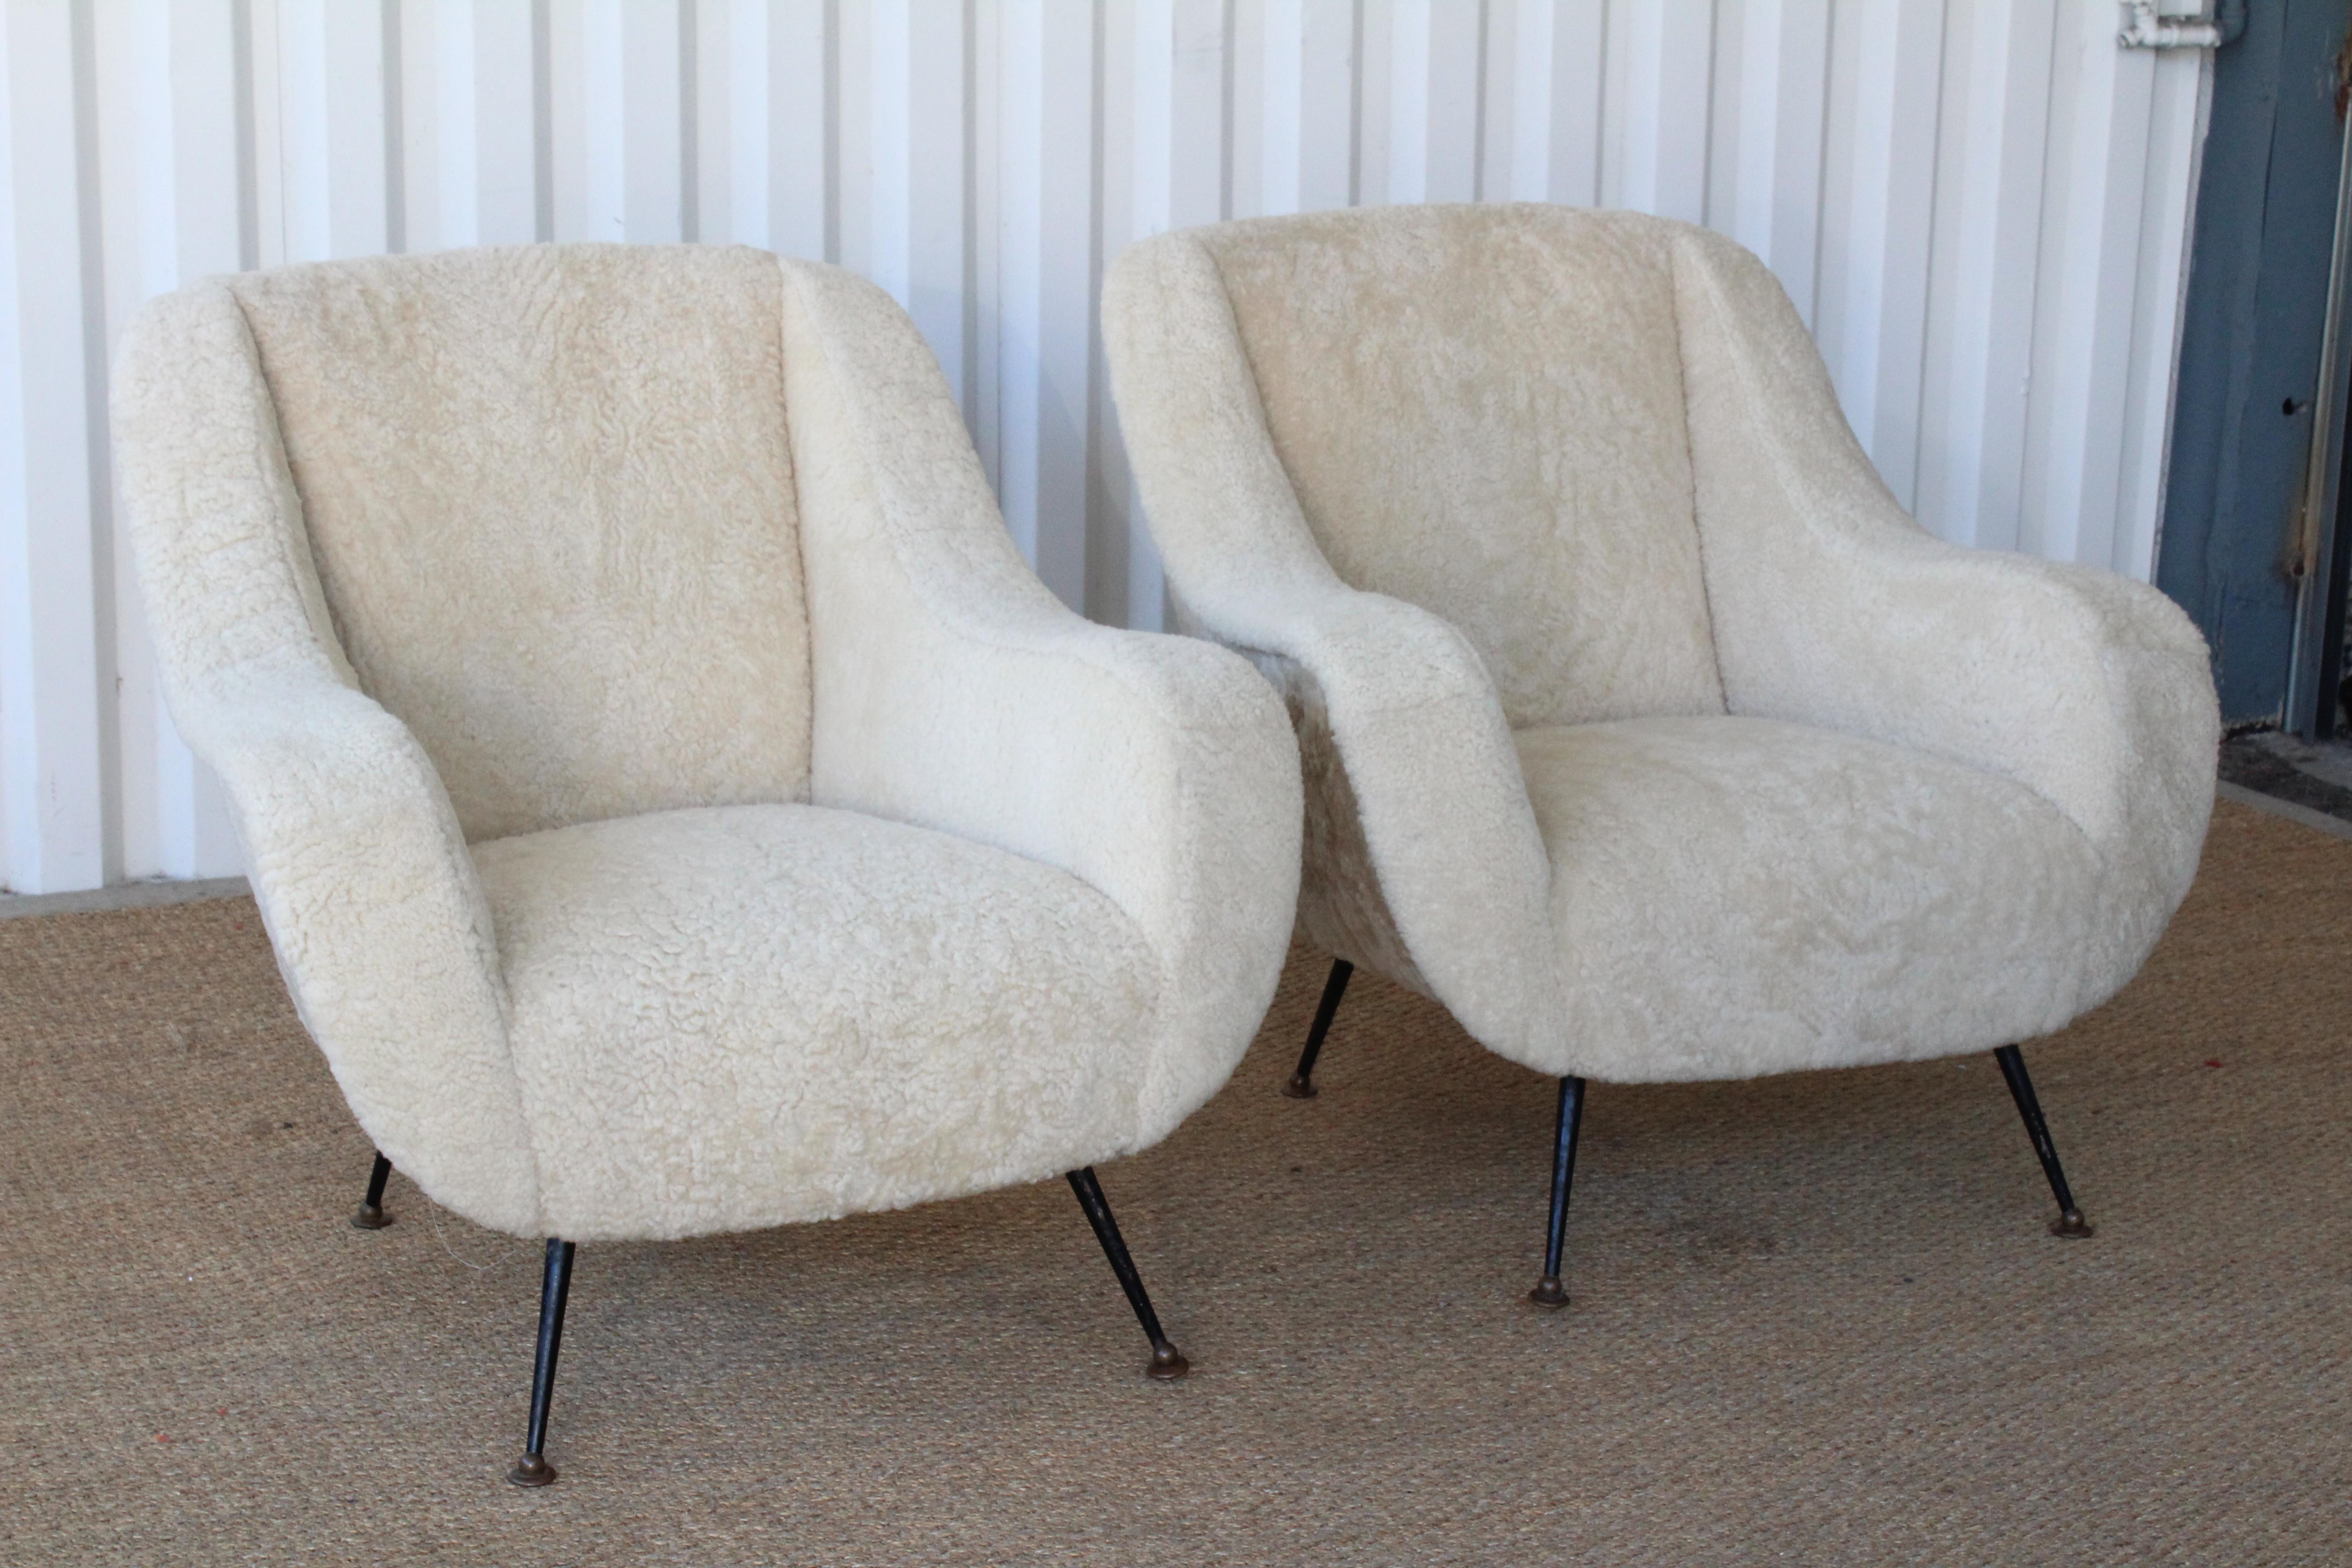 Pair of vintage mid-century lounge chairs, Italy, 1950s. Newly upholstered in off white sheepskin hides. The pair are super comfortable and in excellent condition. The legs are iron with brass pivoting sabots- and retain their age appropriate